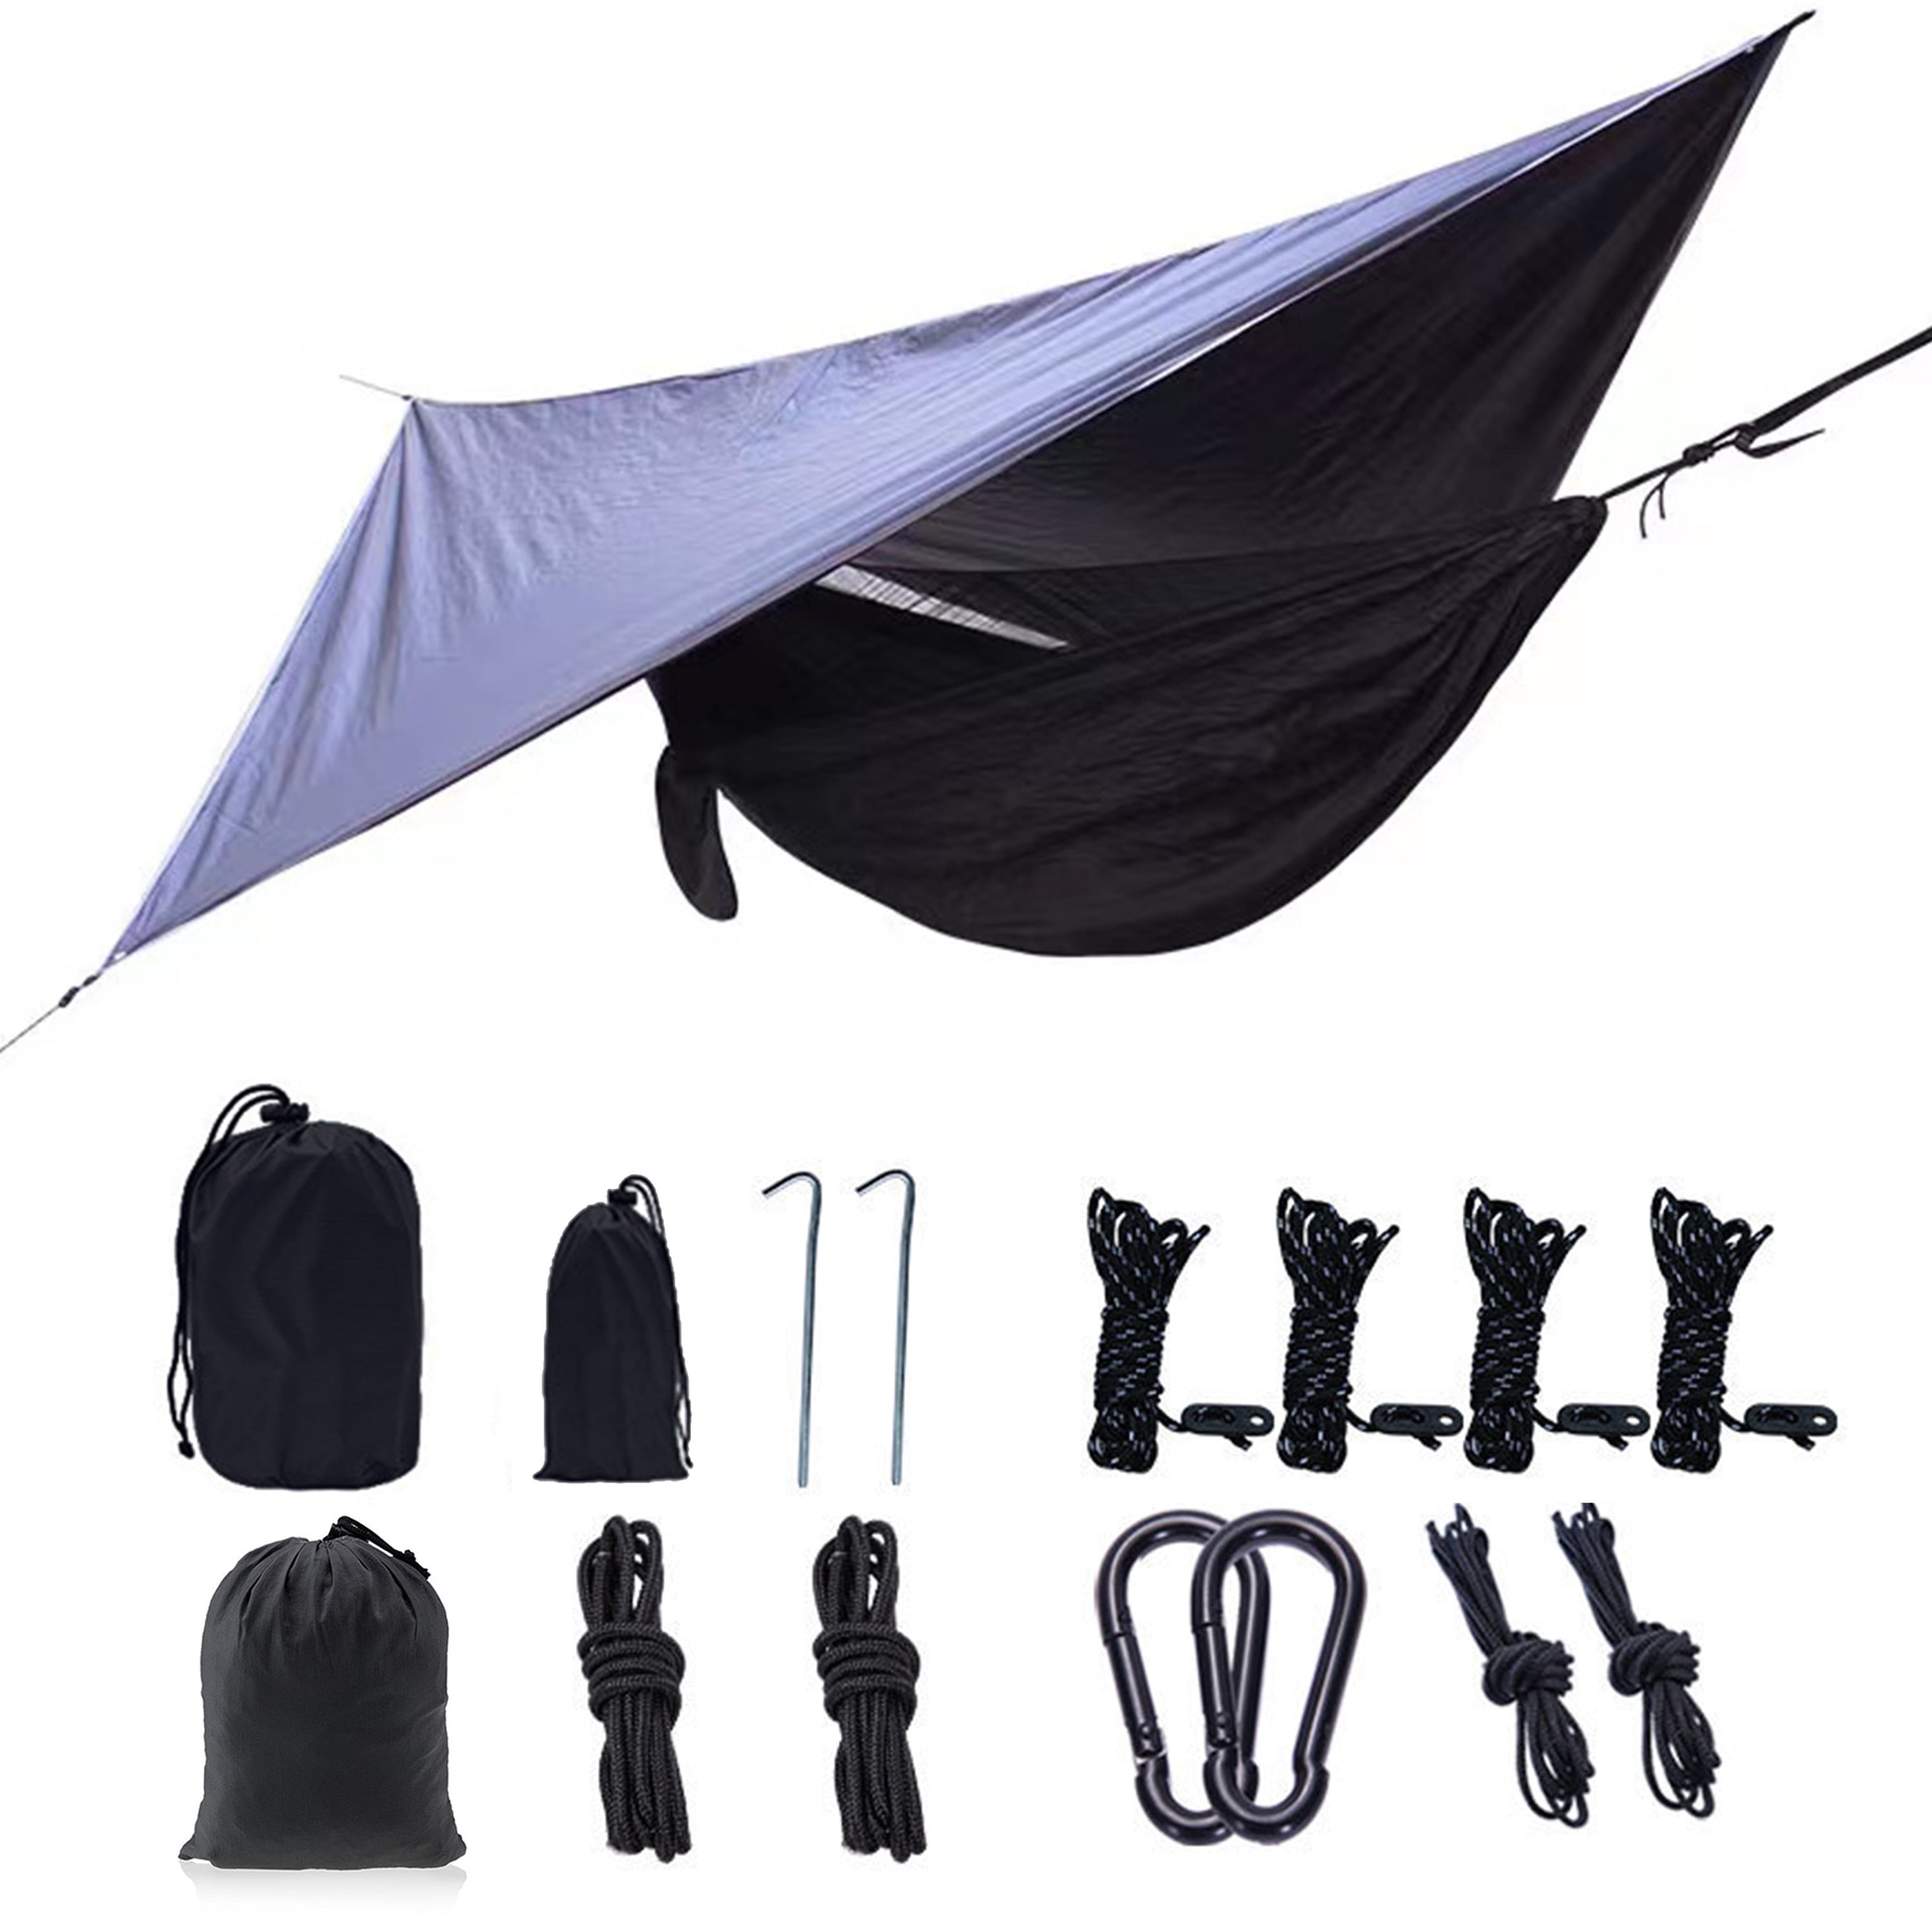 Details about   Portable Tent Camping Hammocks Mosquito Net Rain Cover Outdoor Windproof Bed US 